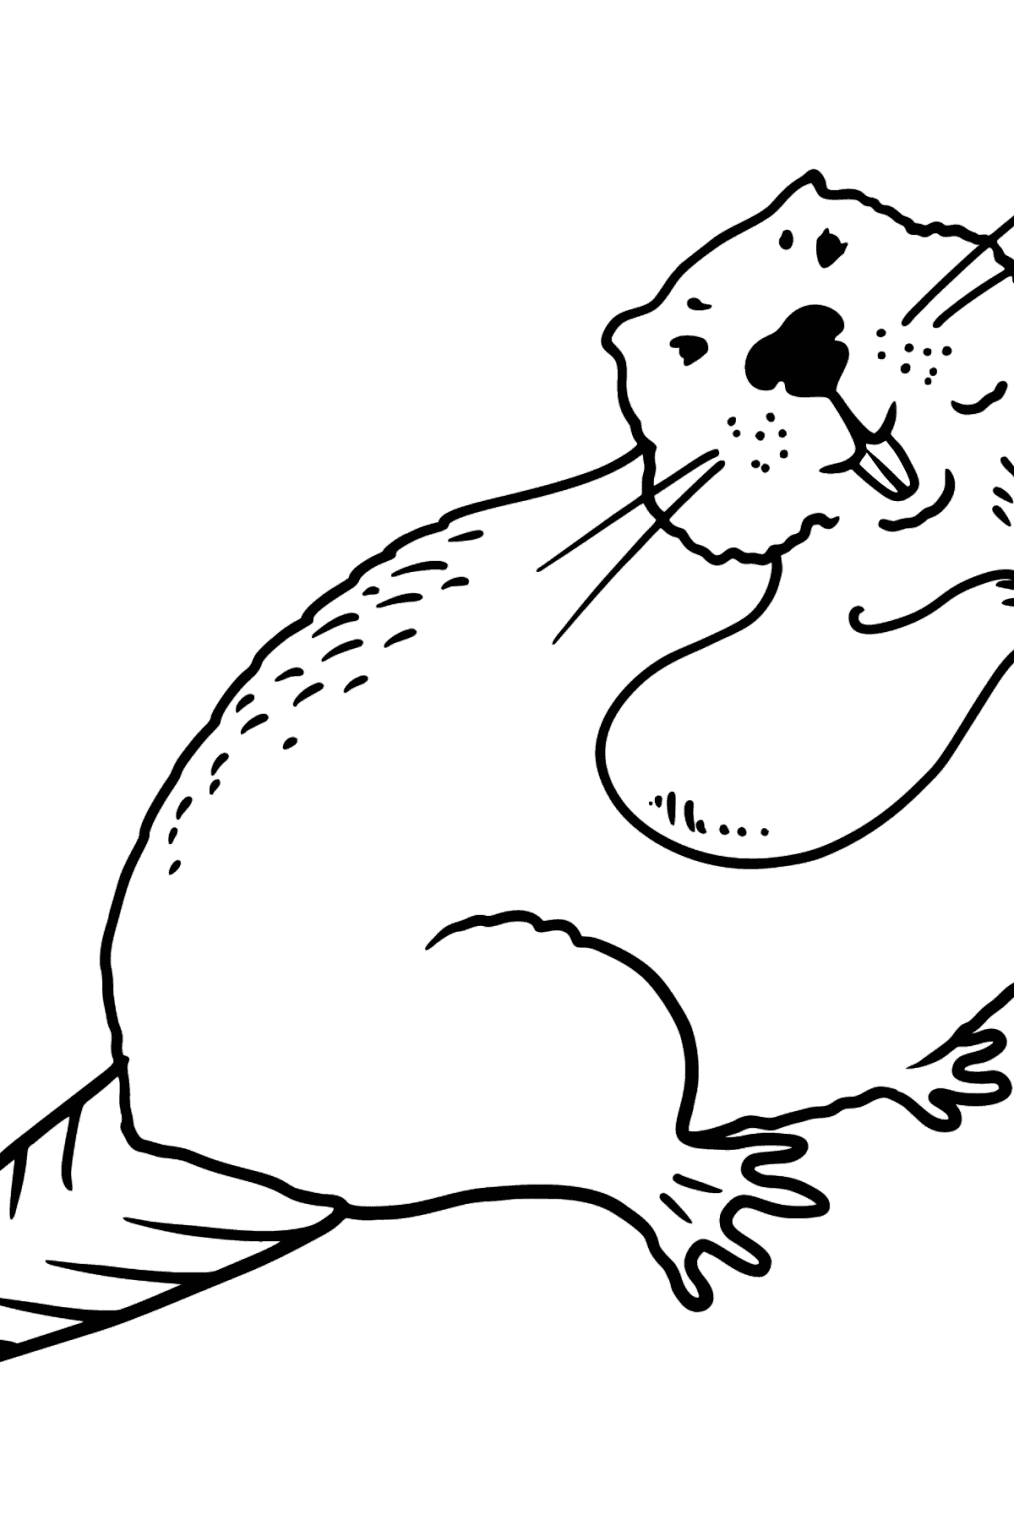 Beaver coloring page ♥ Color Online for Free!